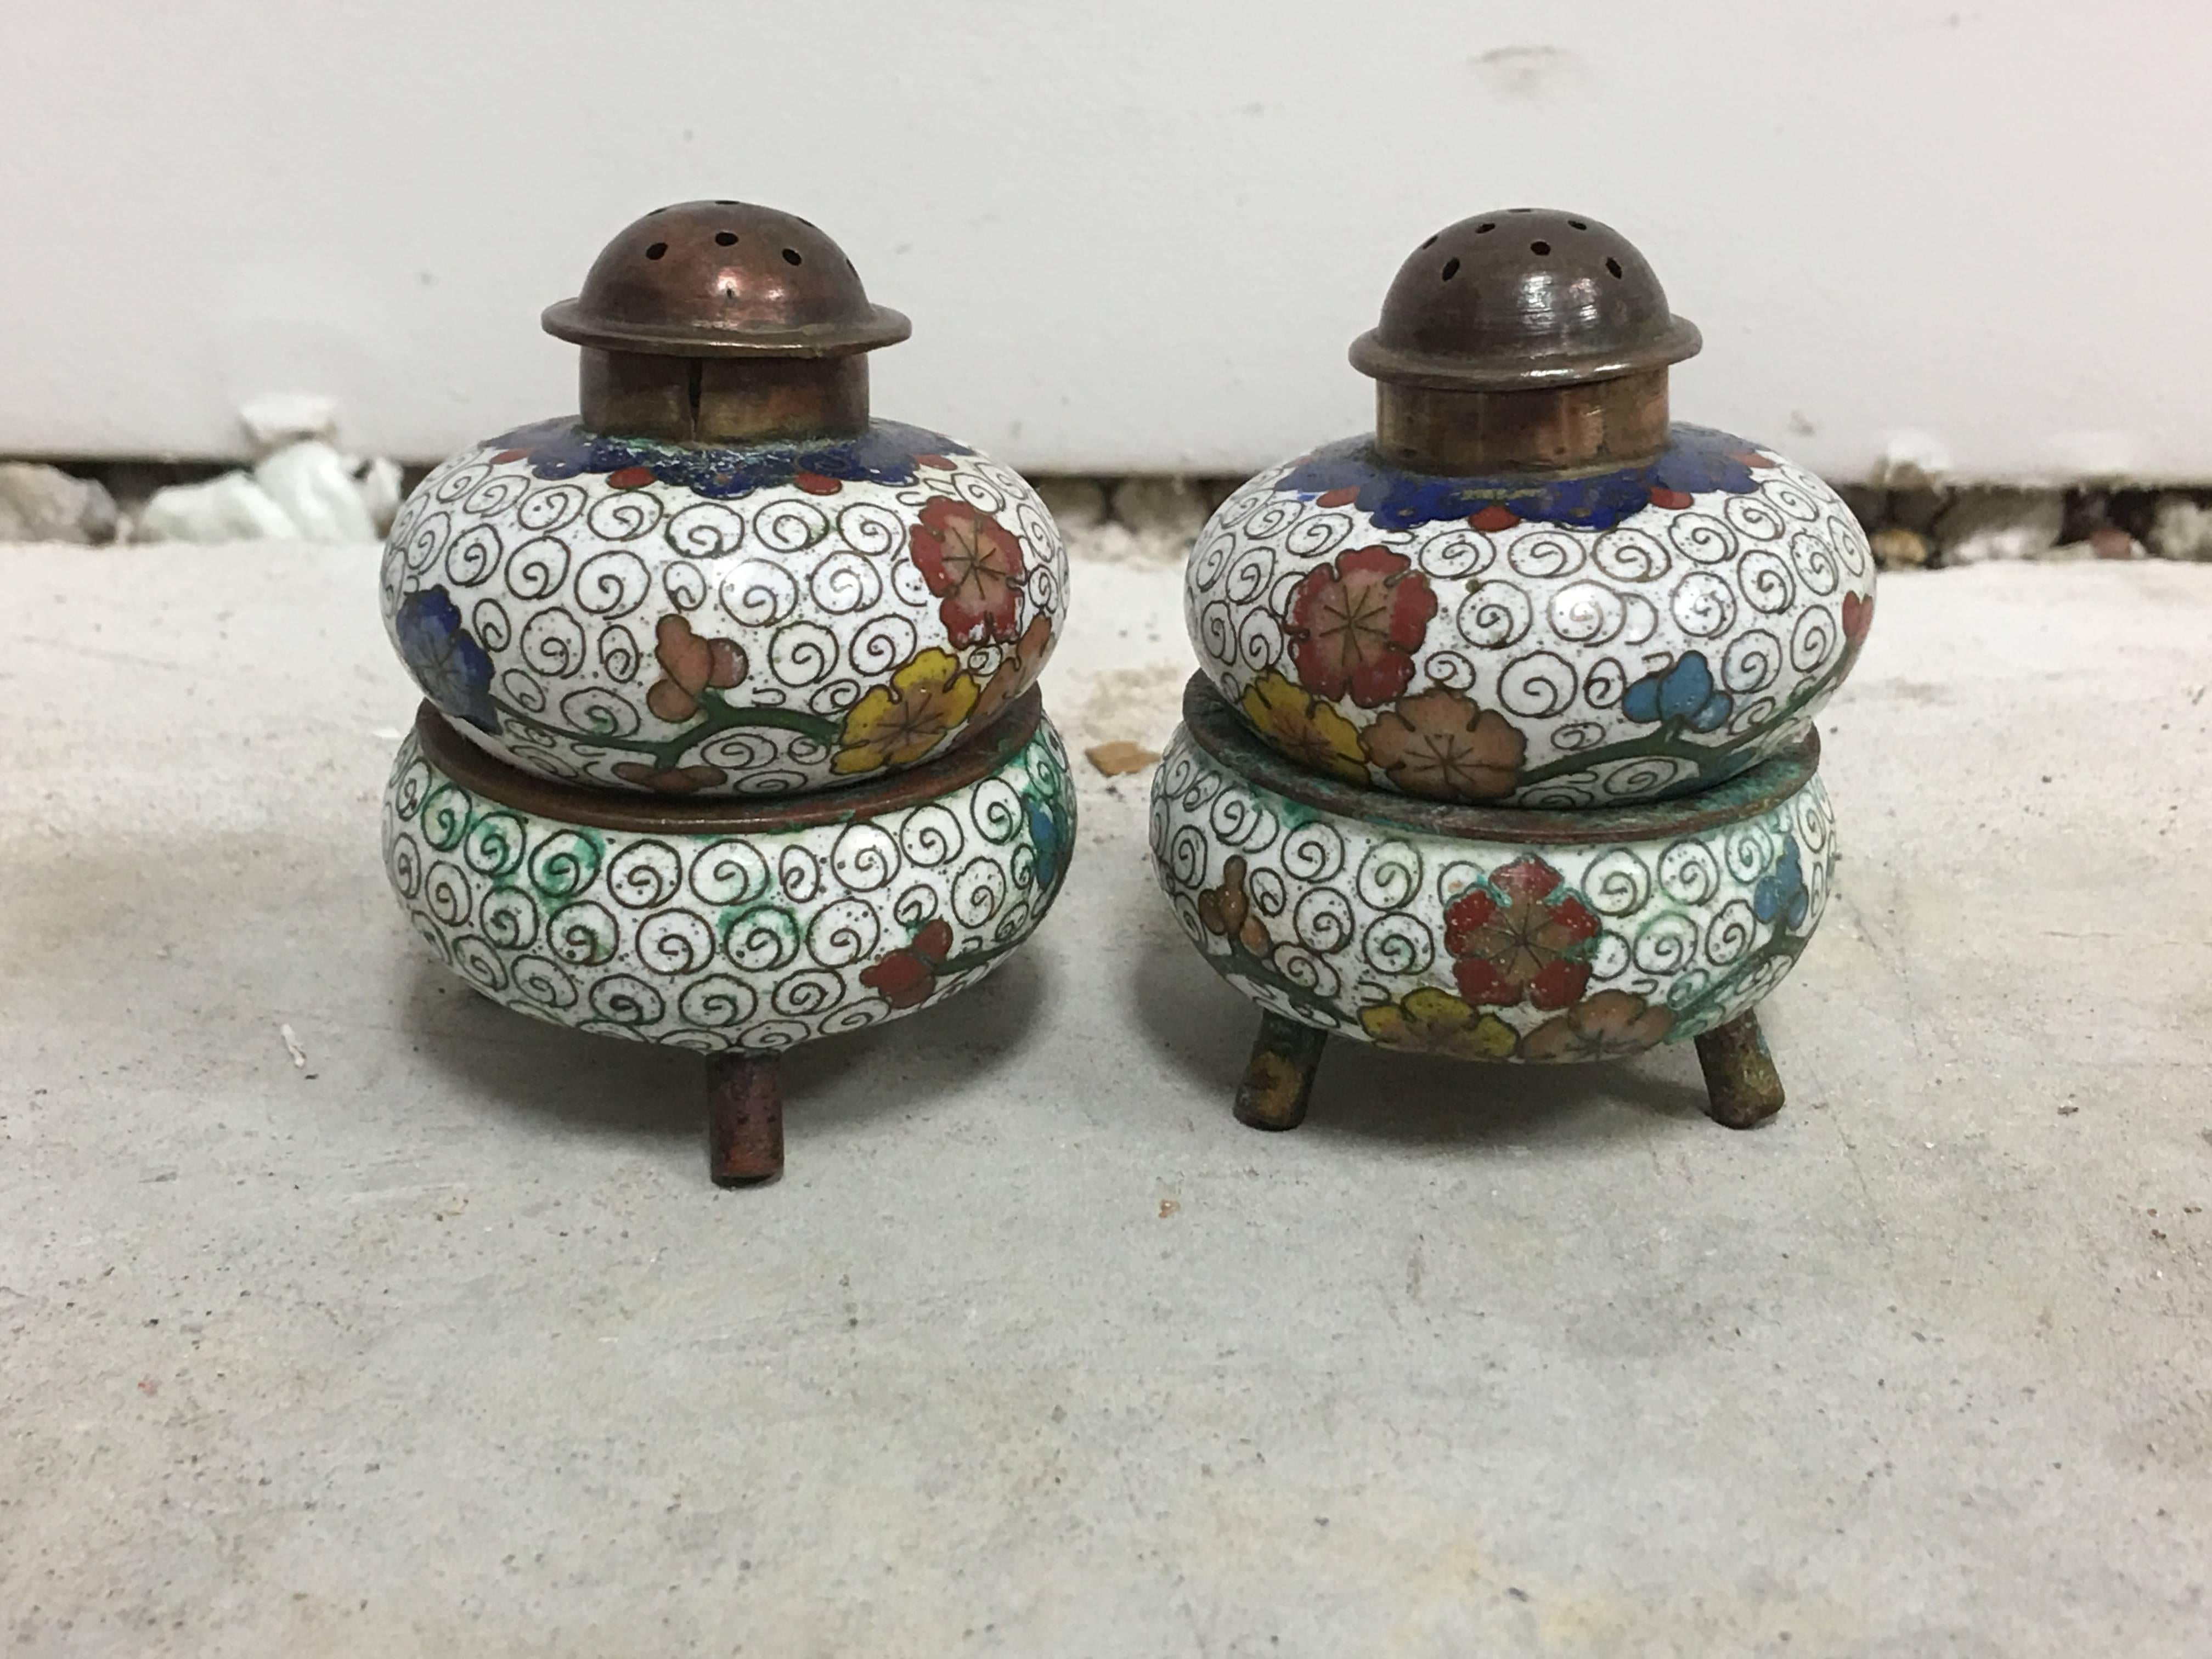 Offered is a stunning pair of white, 1930s Cloisonné salt and pepper shakers with stands.